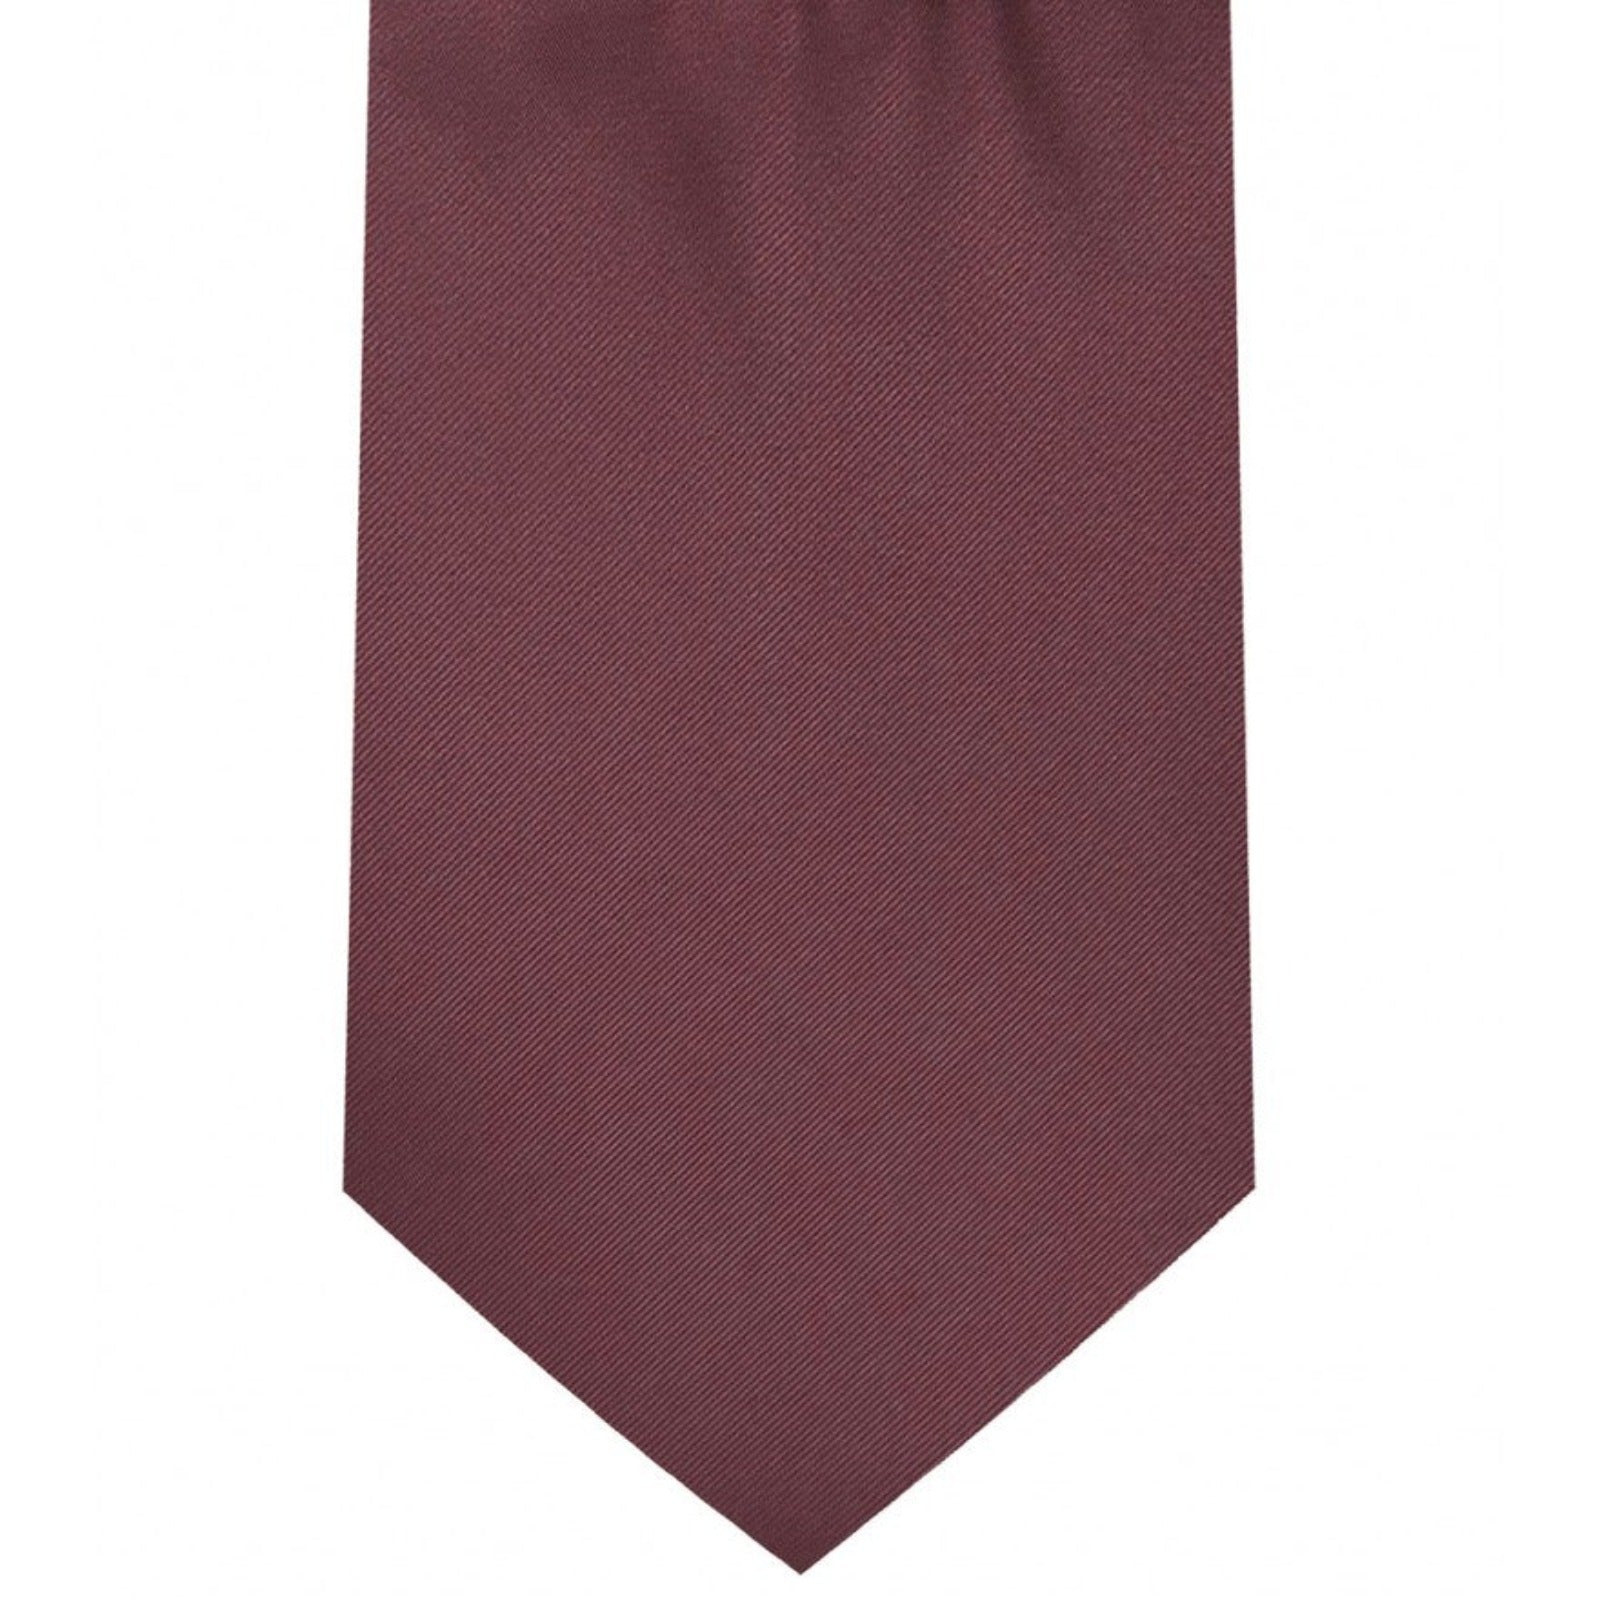 Classic Chianti Tie Regular width 3.5 inches With Matching Pocket Square | KCT Menswear